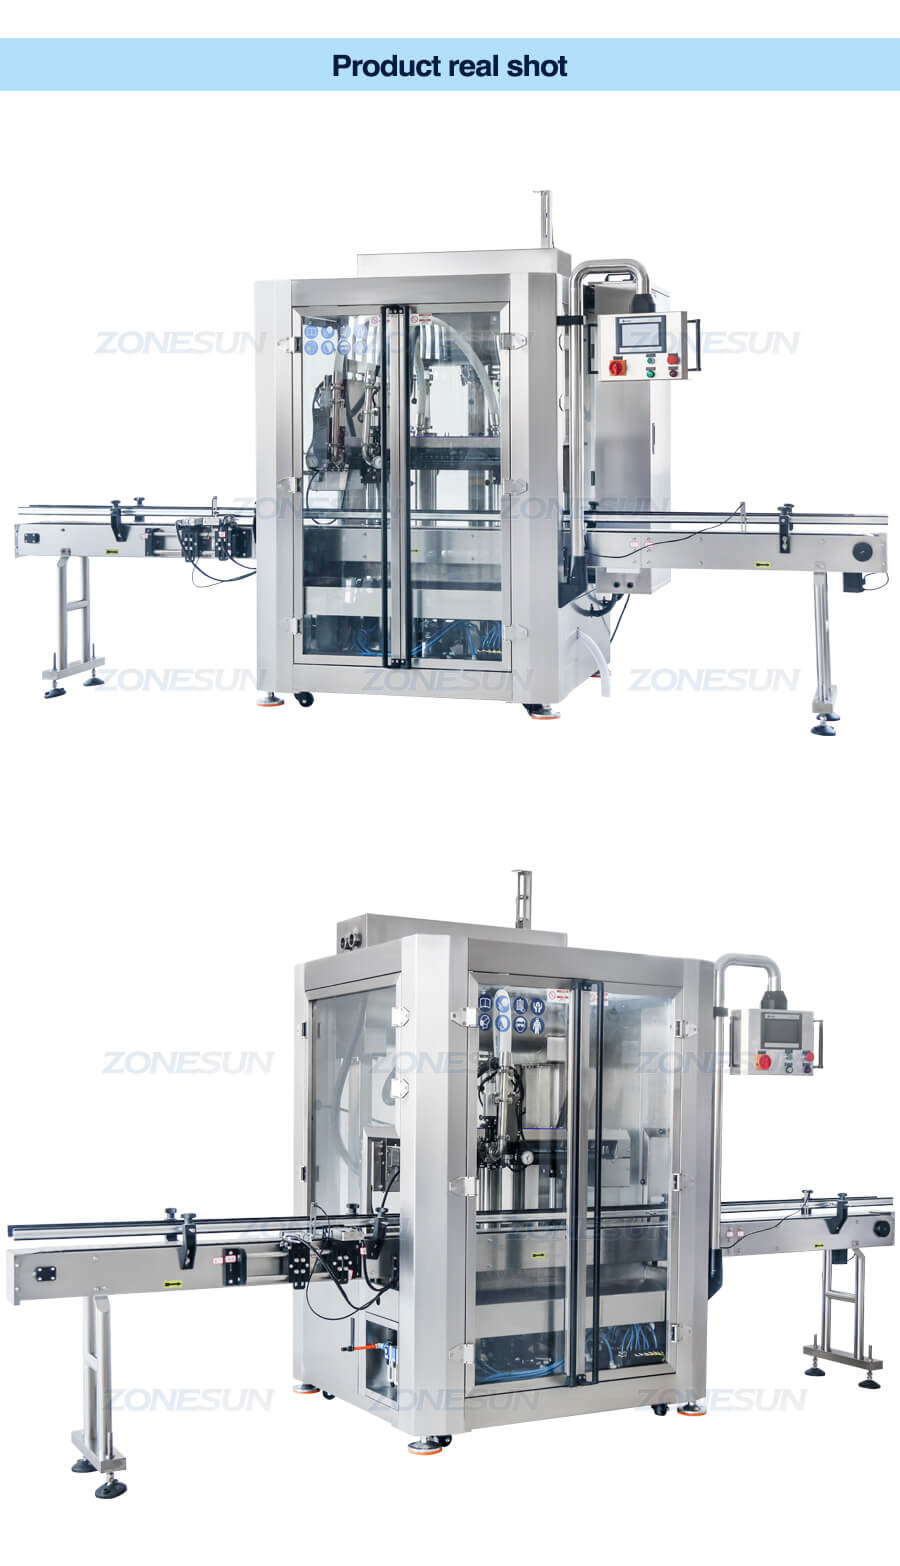 Real Shot of Automatic High Speed Filling Machine